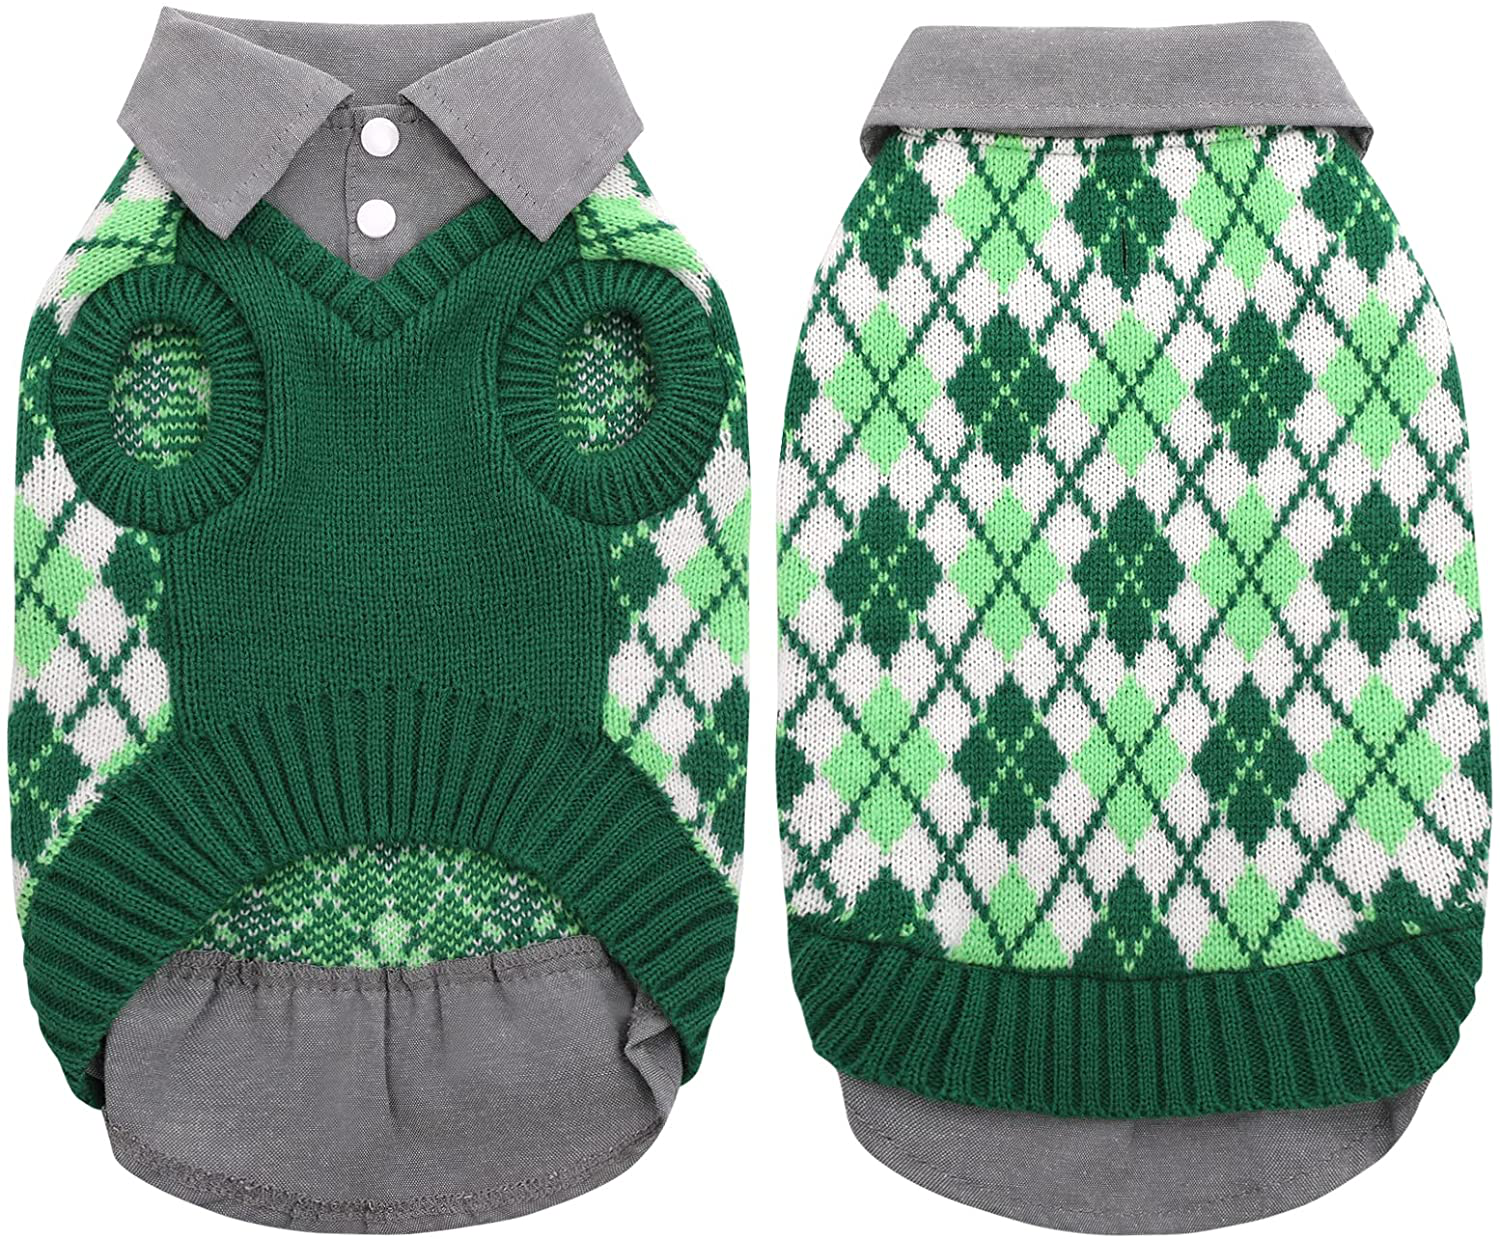 LETSQK Dog Sweater Dog Knitted Pet Clothes Classic Dog Winter Outfit with Plaid Argyle Patterns Warm Dog Sweatshirt with Polo Collar for Small Medium Puppies Dogs Cats Animals & Pet Supplies > Pet Supplies > Cat Supplies > Cat Apparel LETSQK Green X-Small 